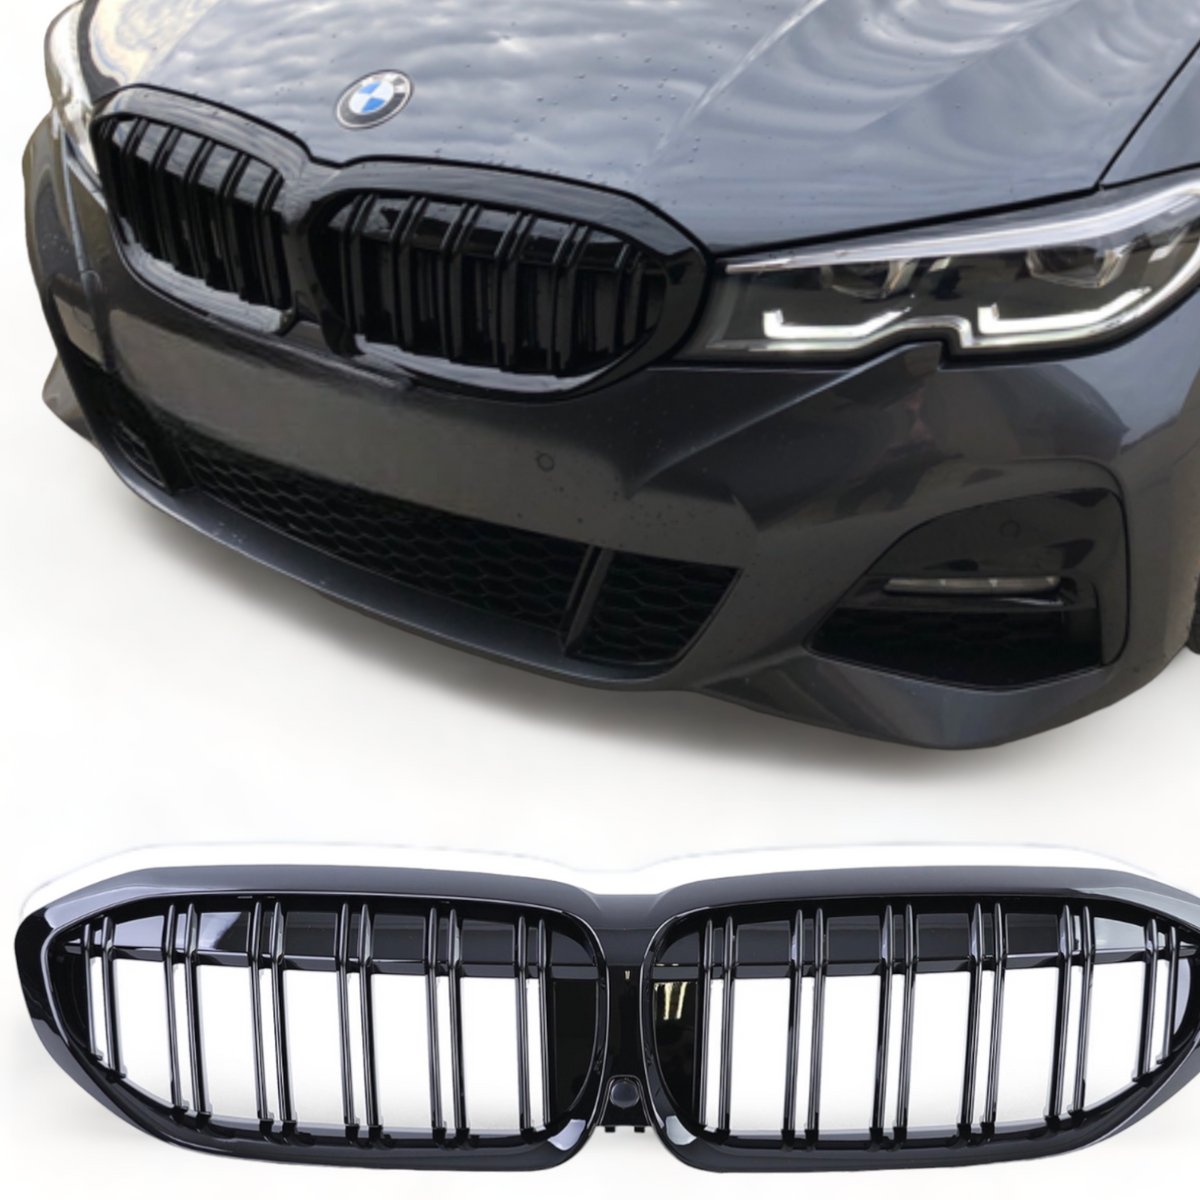 Front Grilles - Double Slat - Fits BMW G20 G21 - 3 Series - Gloss Black